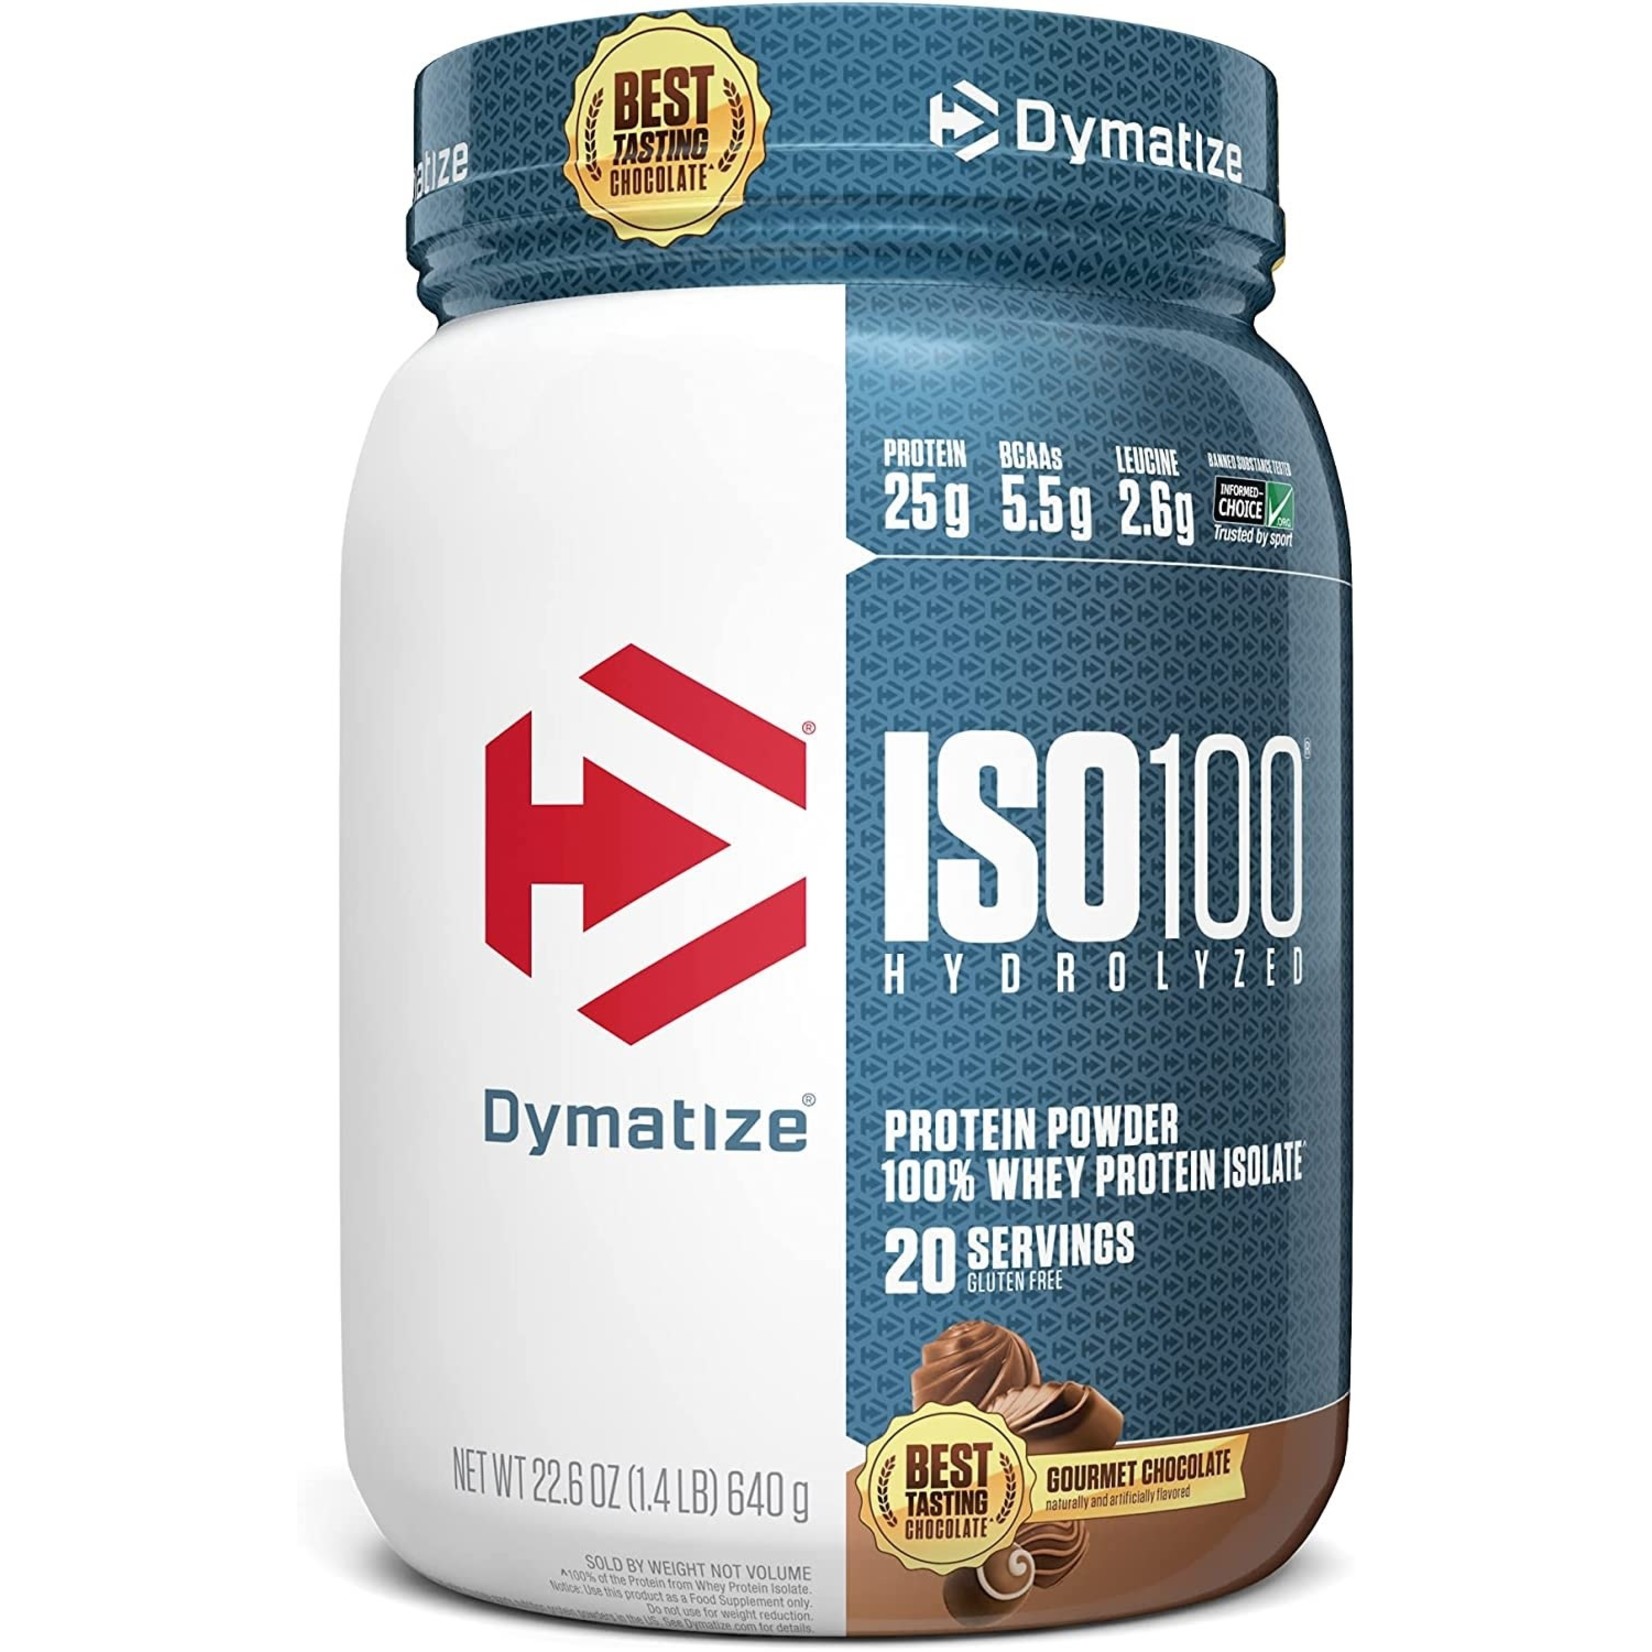 DYMATIZE Dymatize ISO100 Hydrolized 100% Whey Protein Isolate, 20 Servings